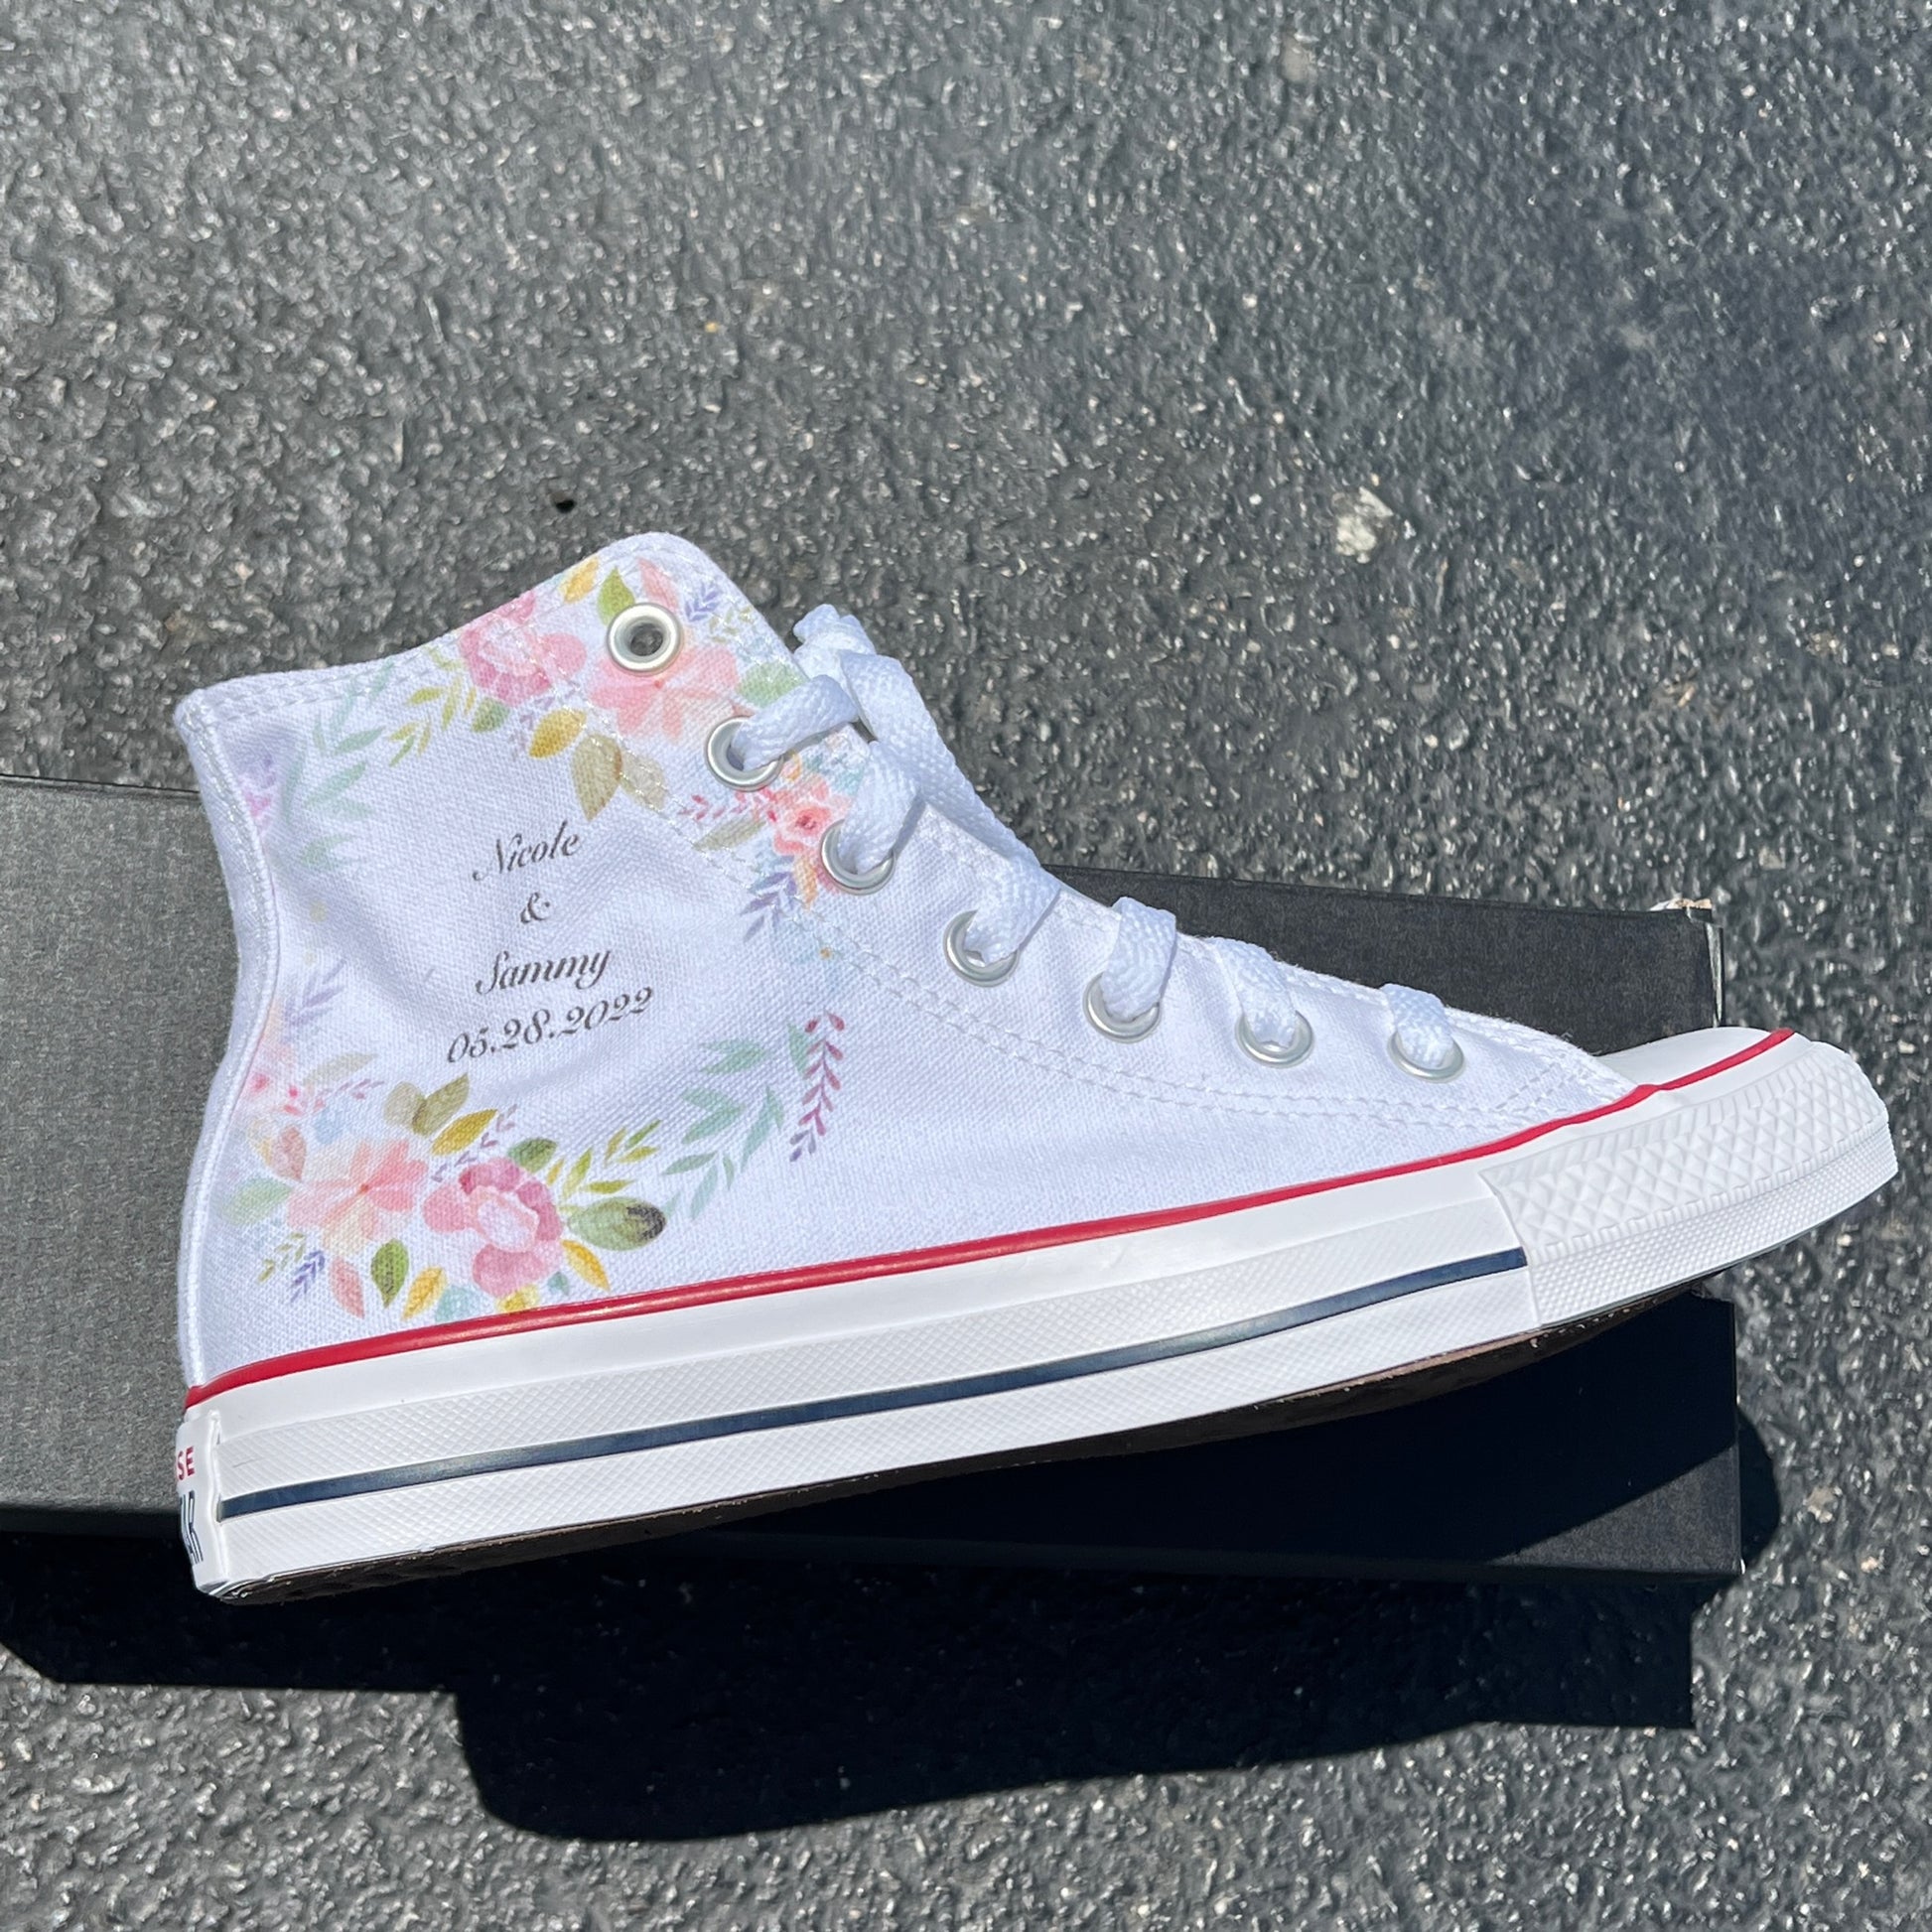 Blue Lace Pattern White High Tops - Casual Comfortable Wedding Shoes -  Custom Converse Shoes